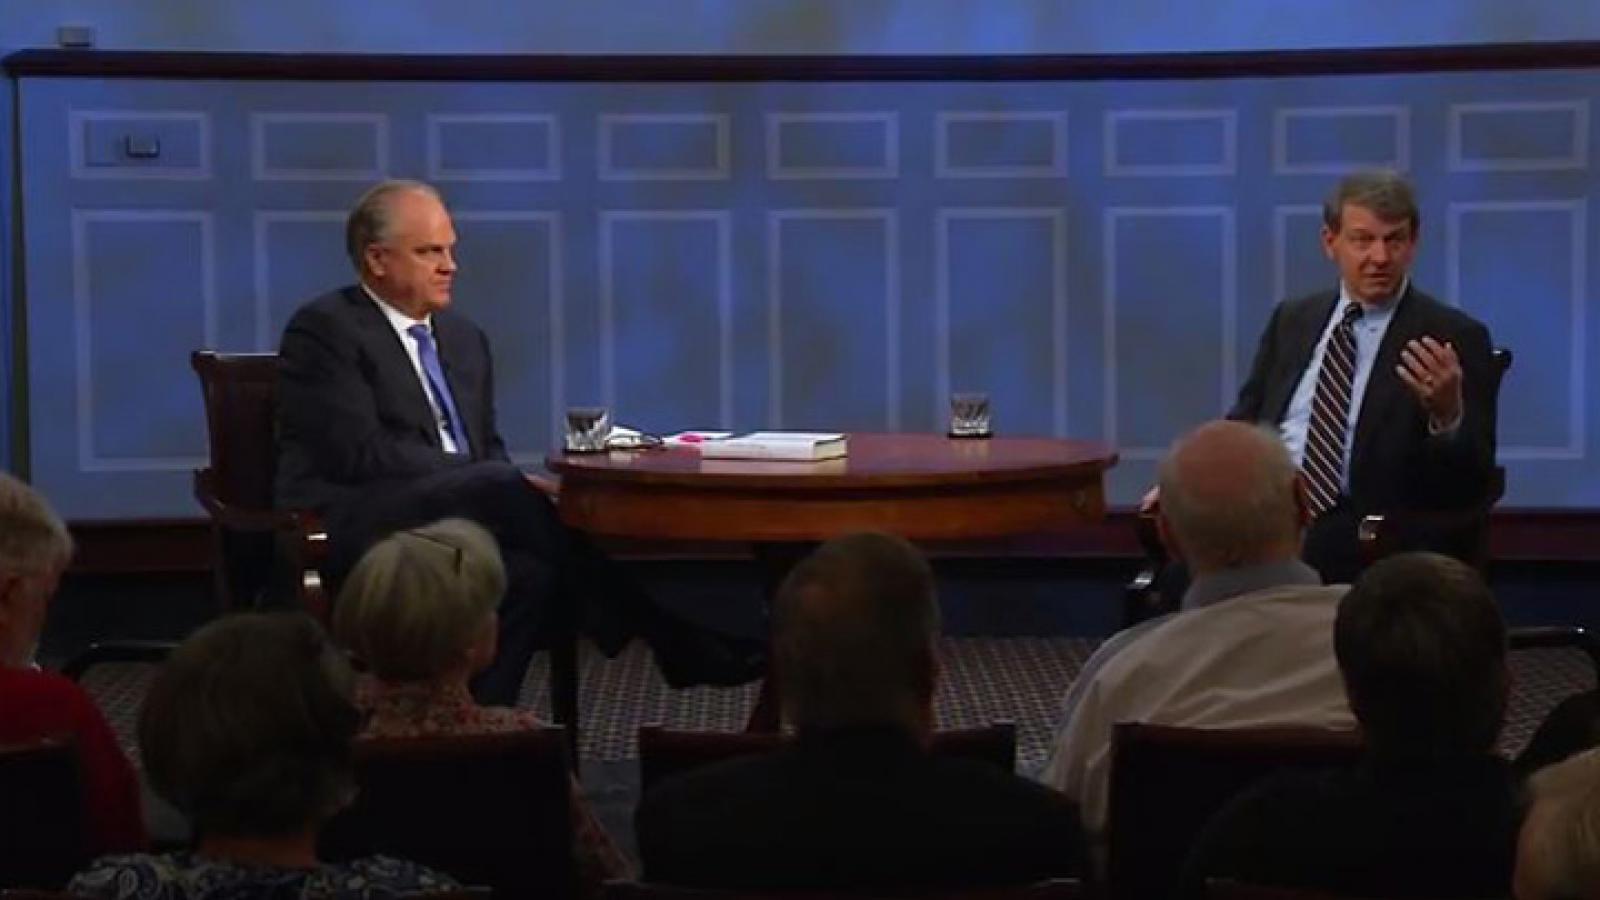 Russell Riley, an expert on the Clinton presidency, takes questions from the American Forum studio audience